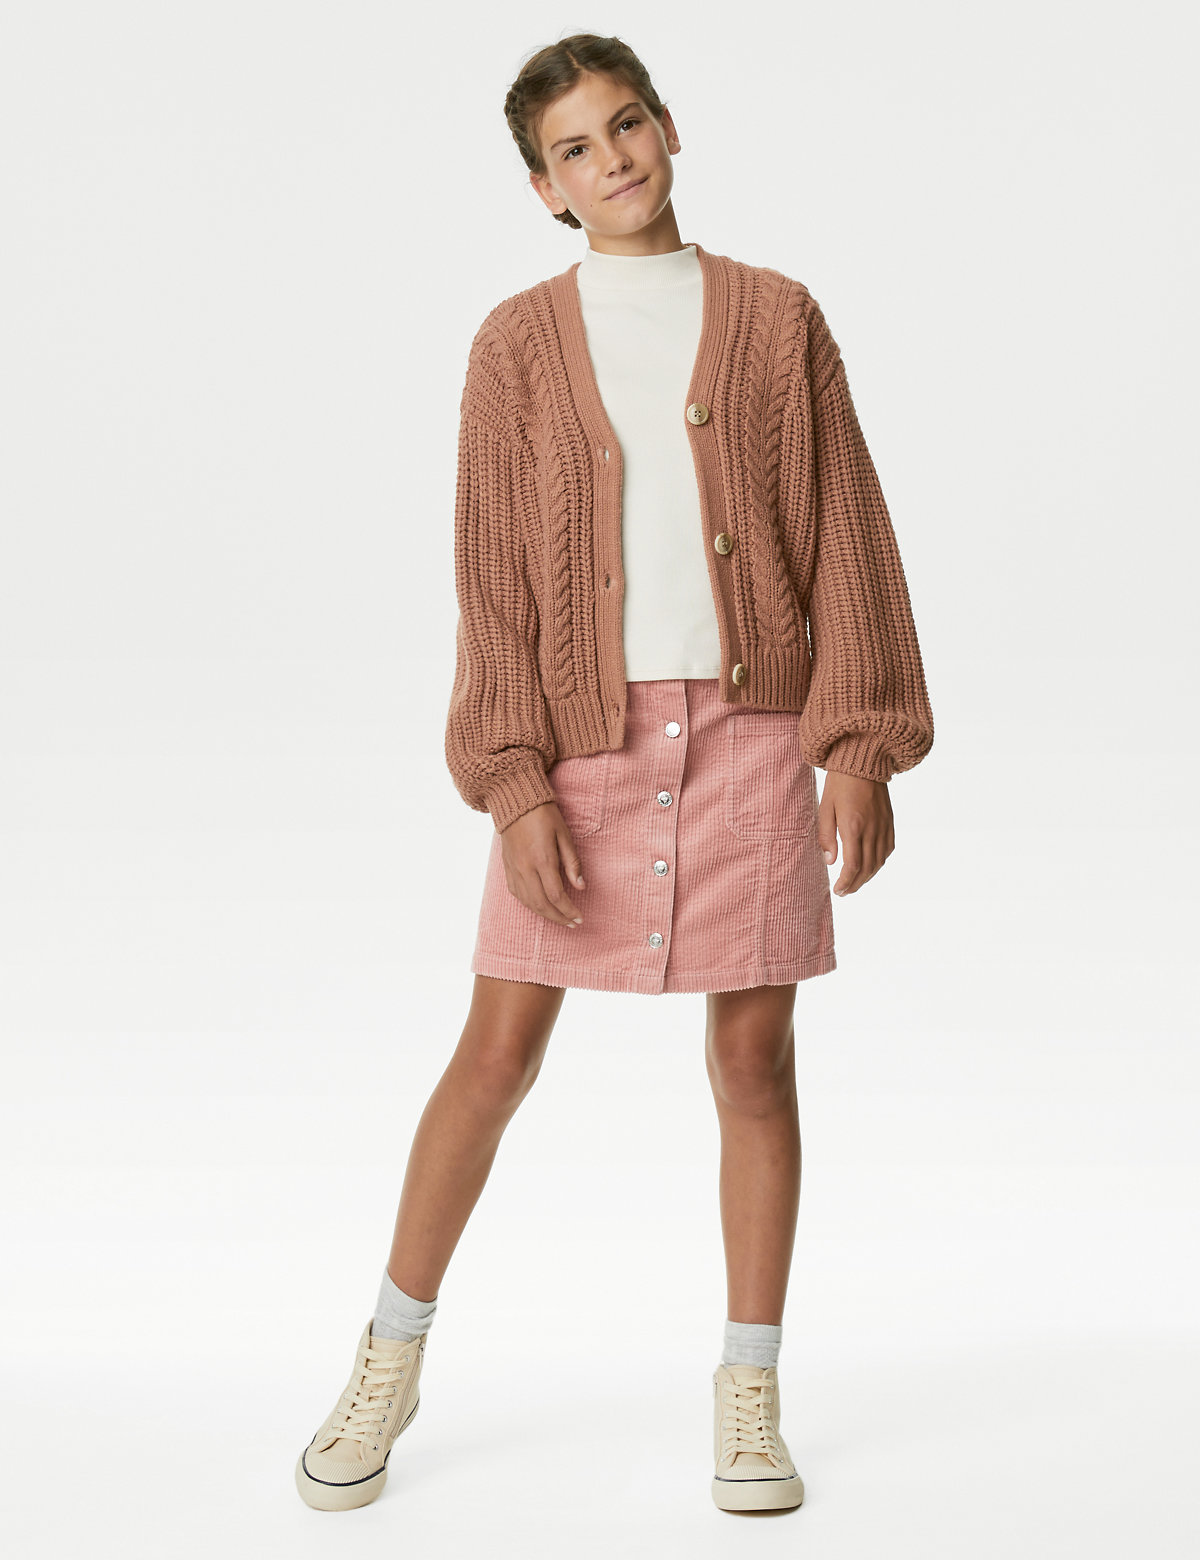 Cable Knit Cardigan (6-16 Yrs)